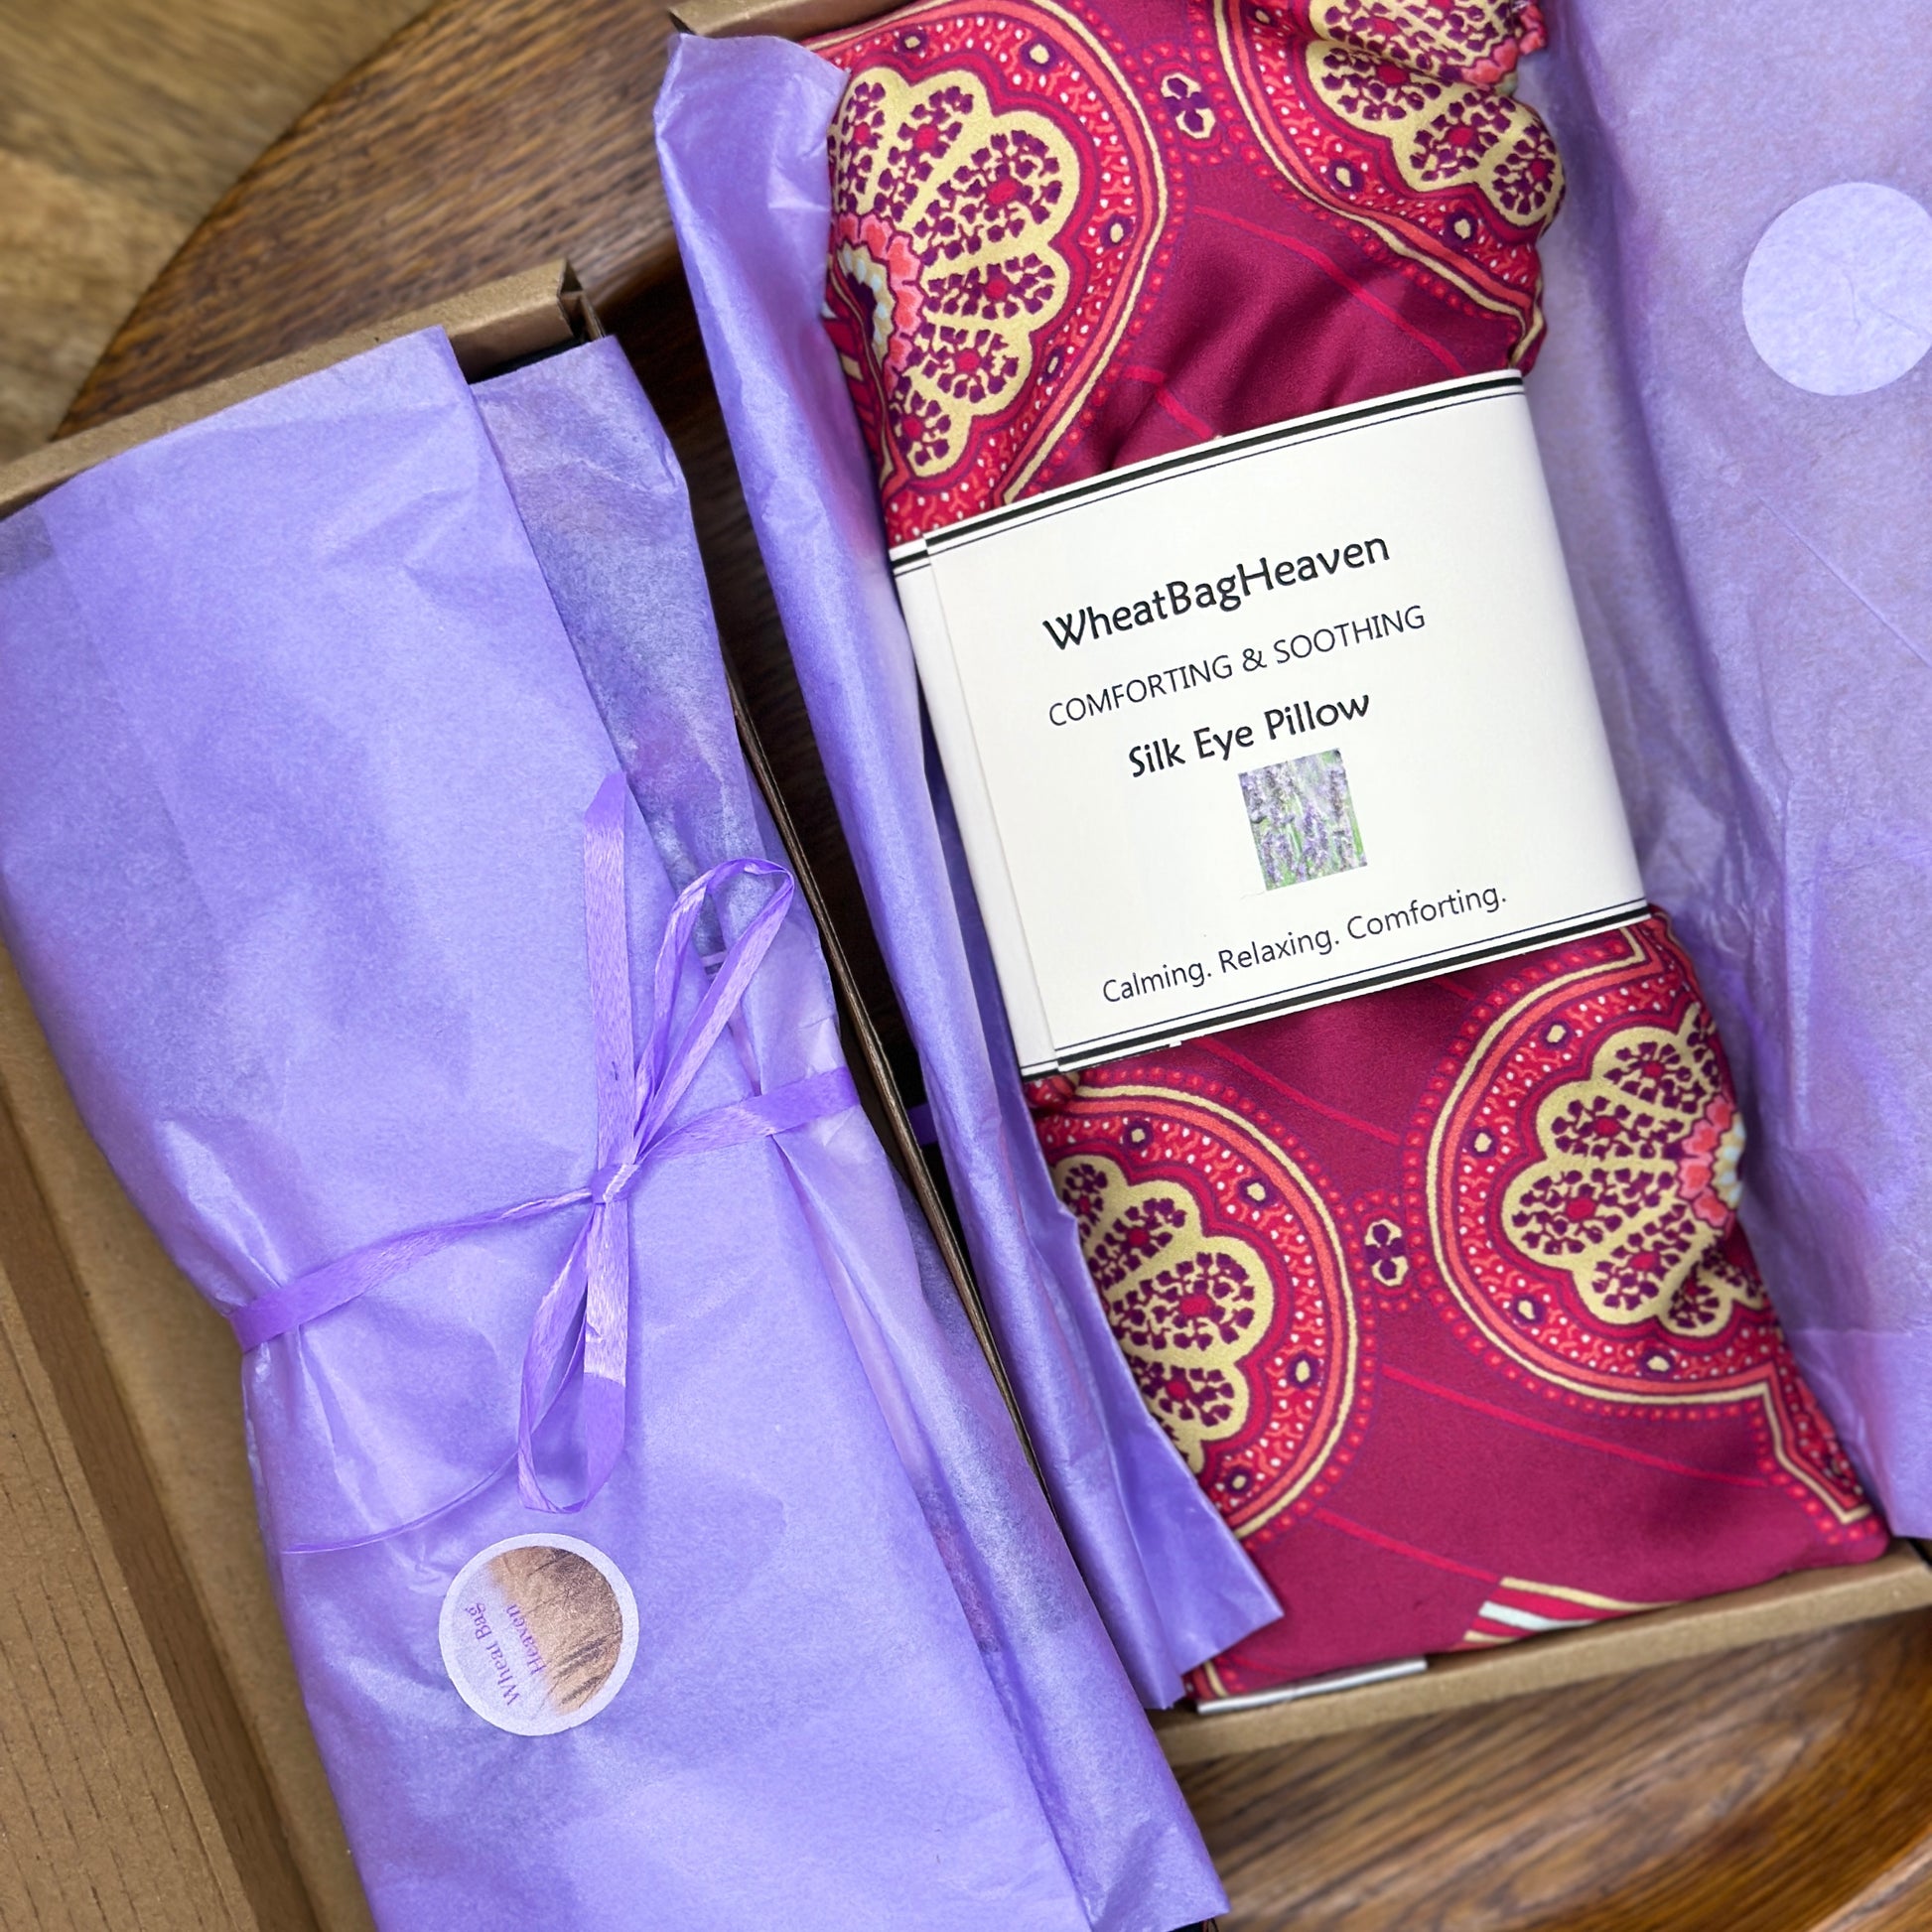 yoga meditation silk eye pillow from WheatBagHeaven. Wrapped in lilac tissue and tied with ribbon 